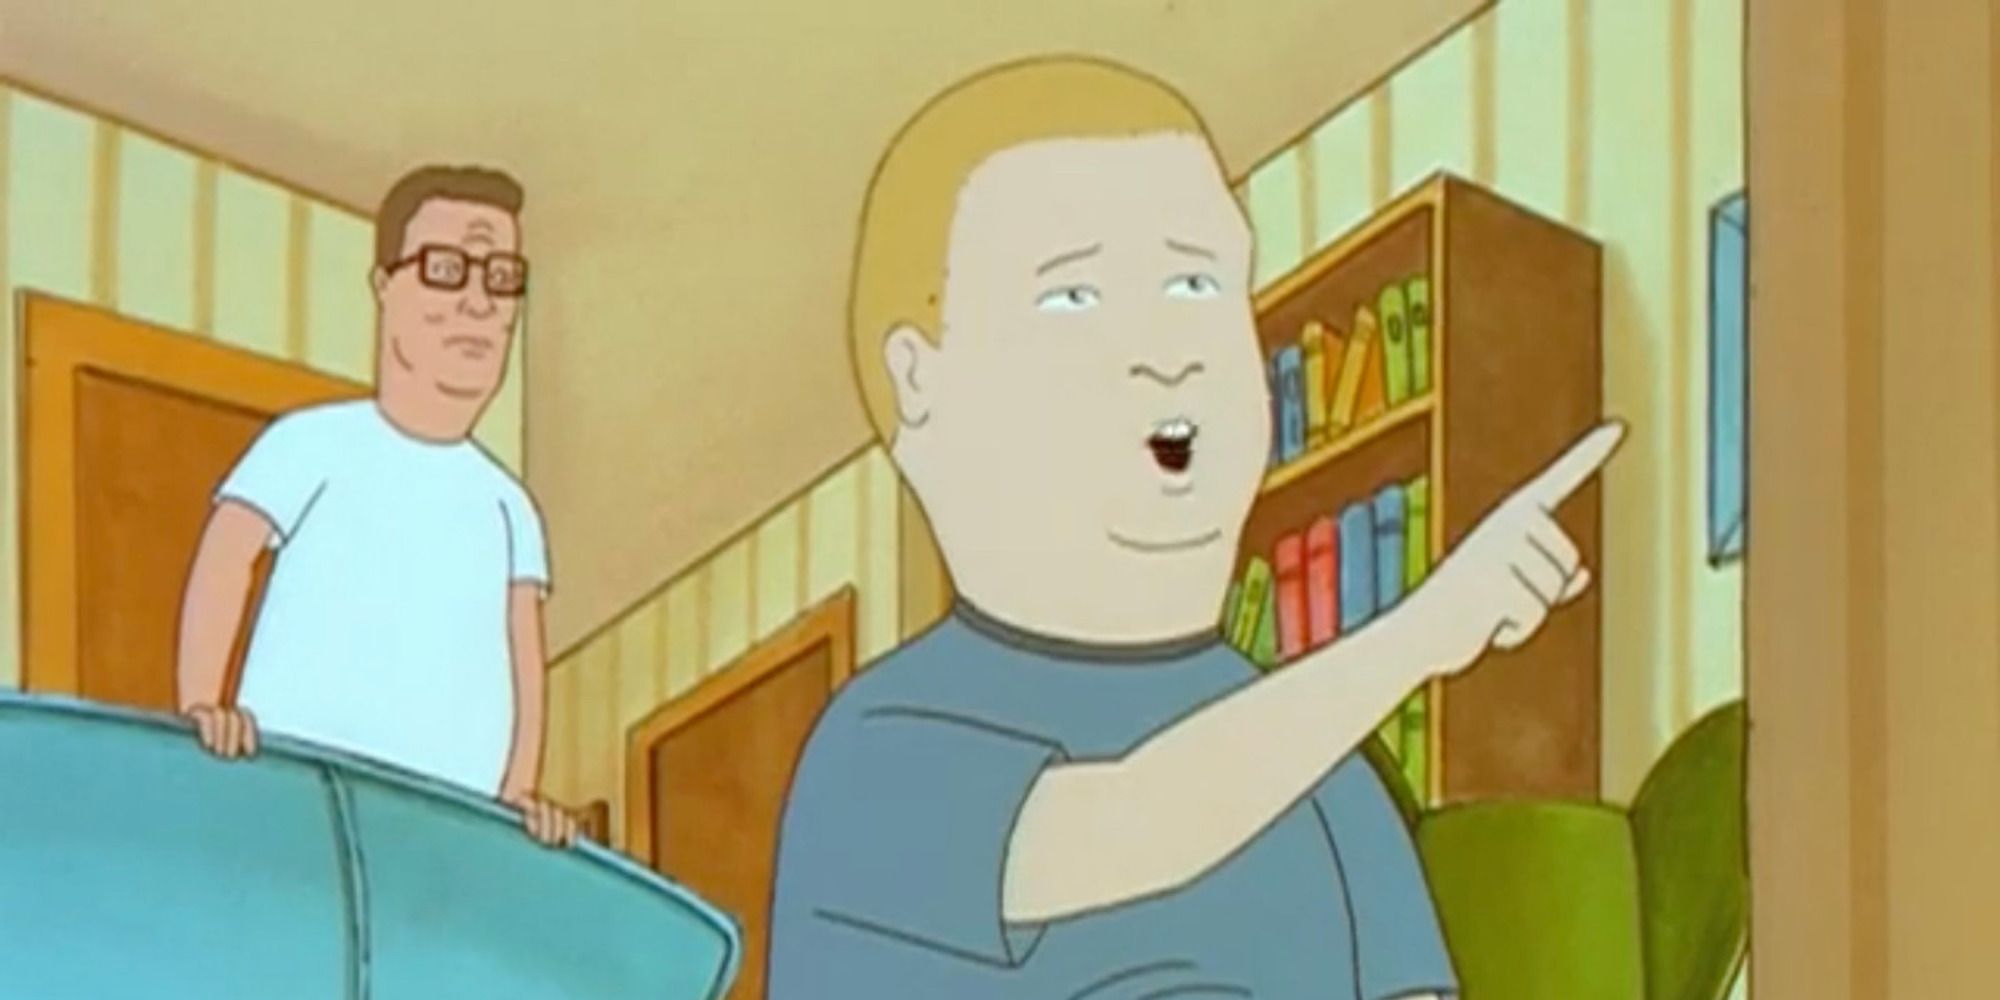 Hank and Bobby from King of the Hill